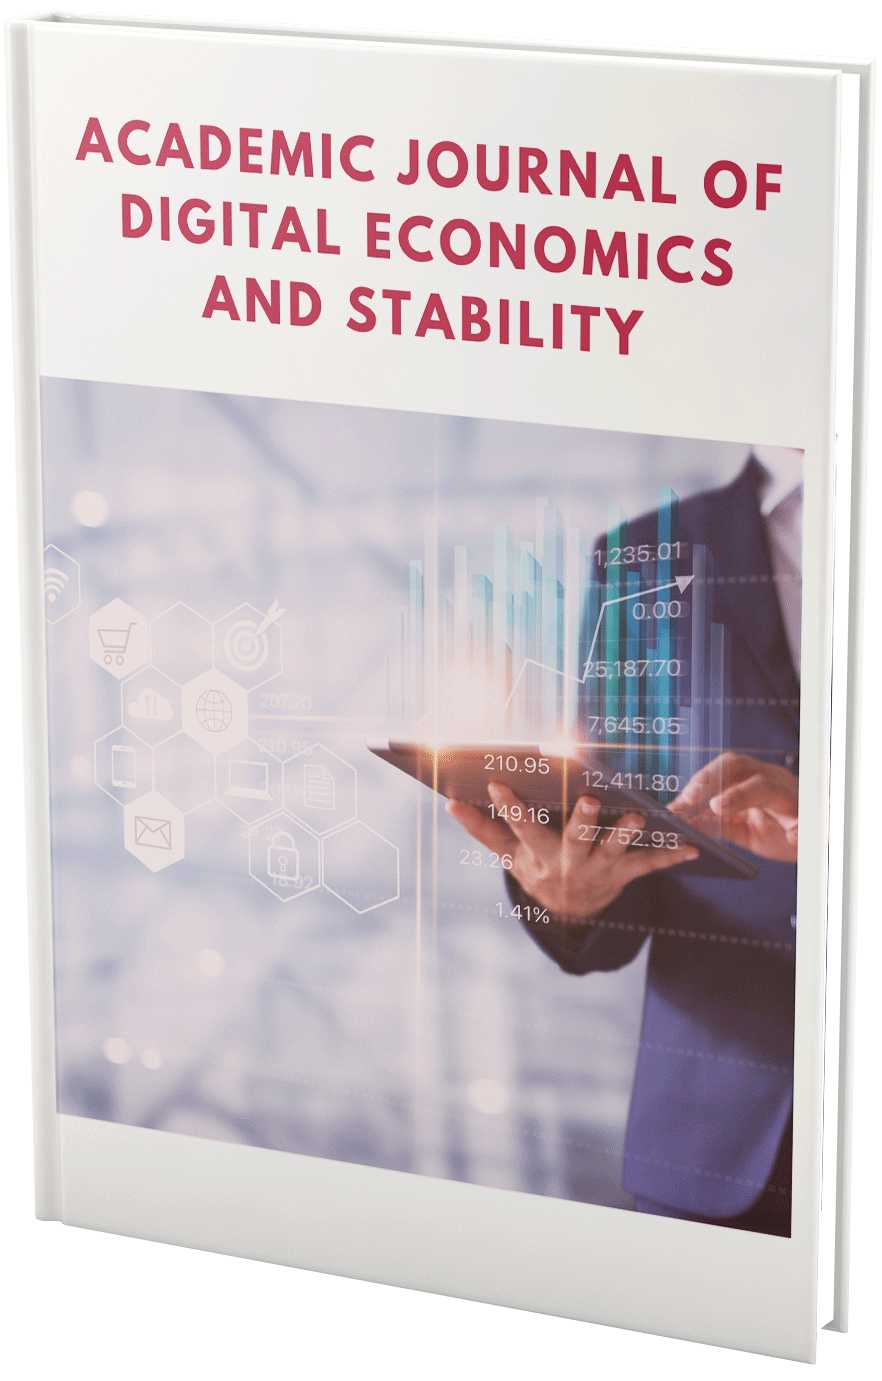 					View Vol. 4 (2021): Academic Journal of Digital Economics and Stability (Spain)
				